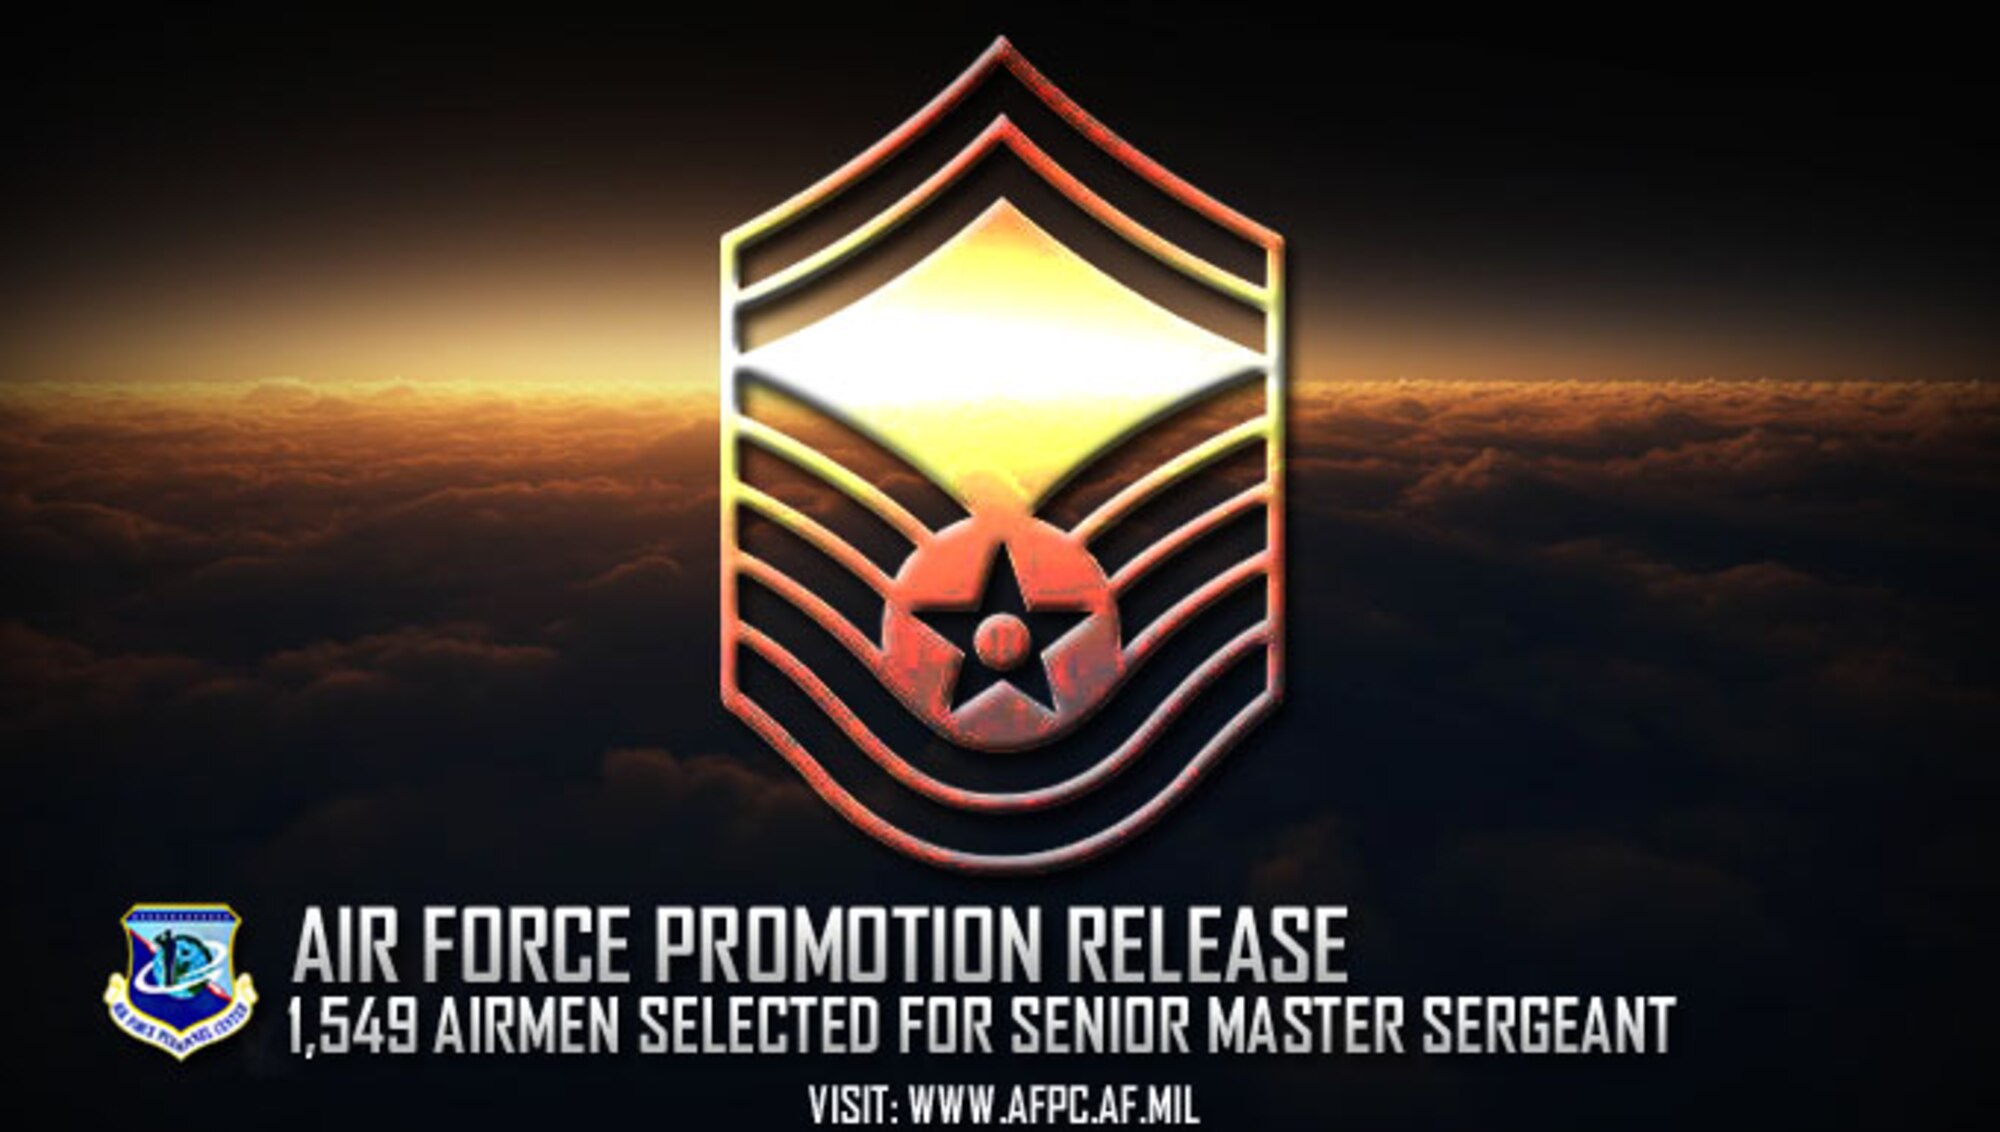 Congratulations to the 1,549 Airmen selected for senior master sergeant in the 18E8 promotion cycle! The list is available on the Enlisted Promotions page of Air Force’s Personnel Center public website, myPers and the Air Force Portal. Airmen can access their score notices on the virtual Military Personnel Flight via the secure applications page. (U.S. Air Force graphic by Staff Sgt. Alexx Pons)